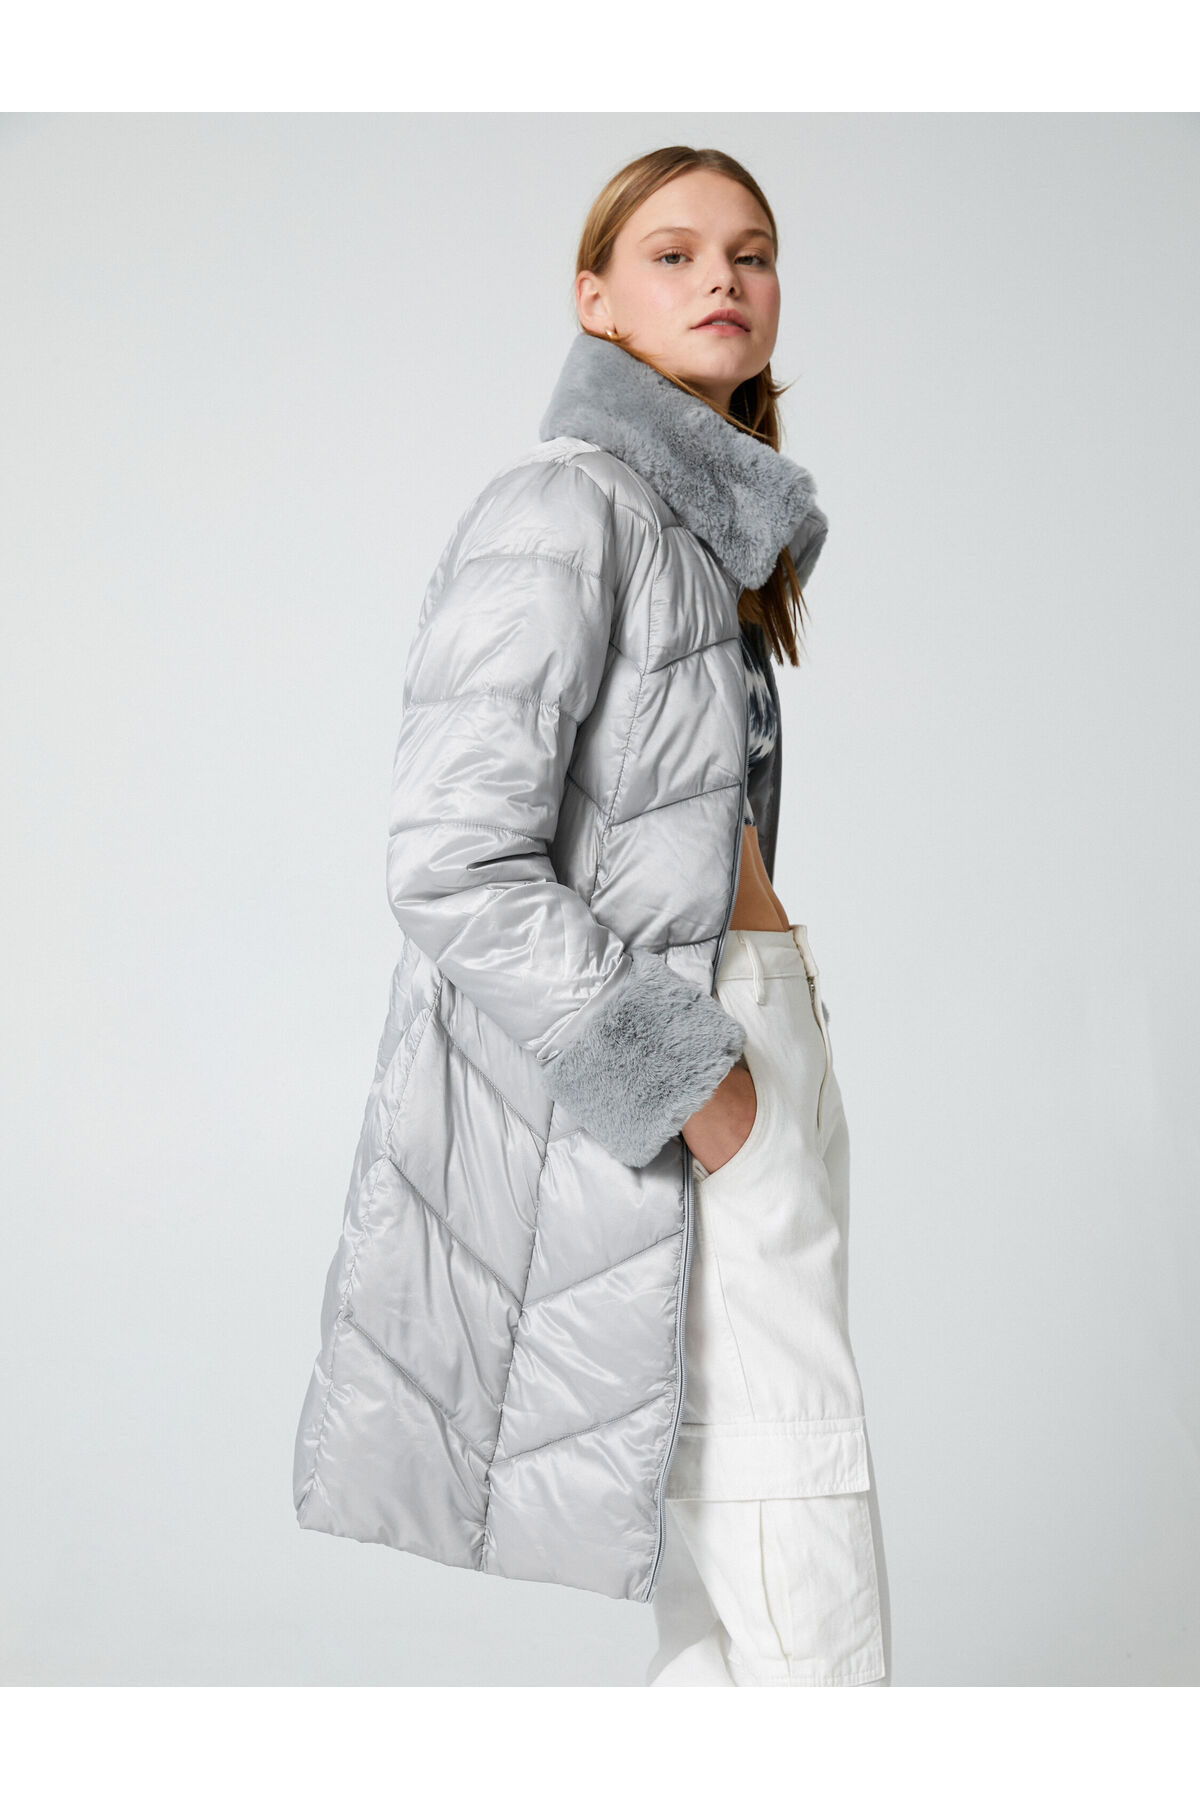 Koton Long Puffer Jacket with Belt, Faux Für Detail and Pockets